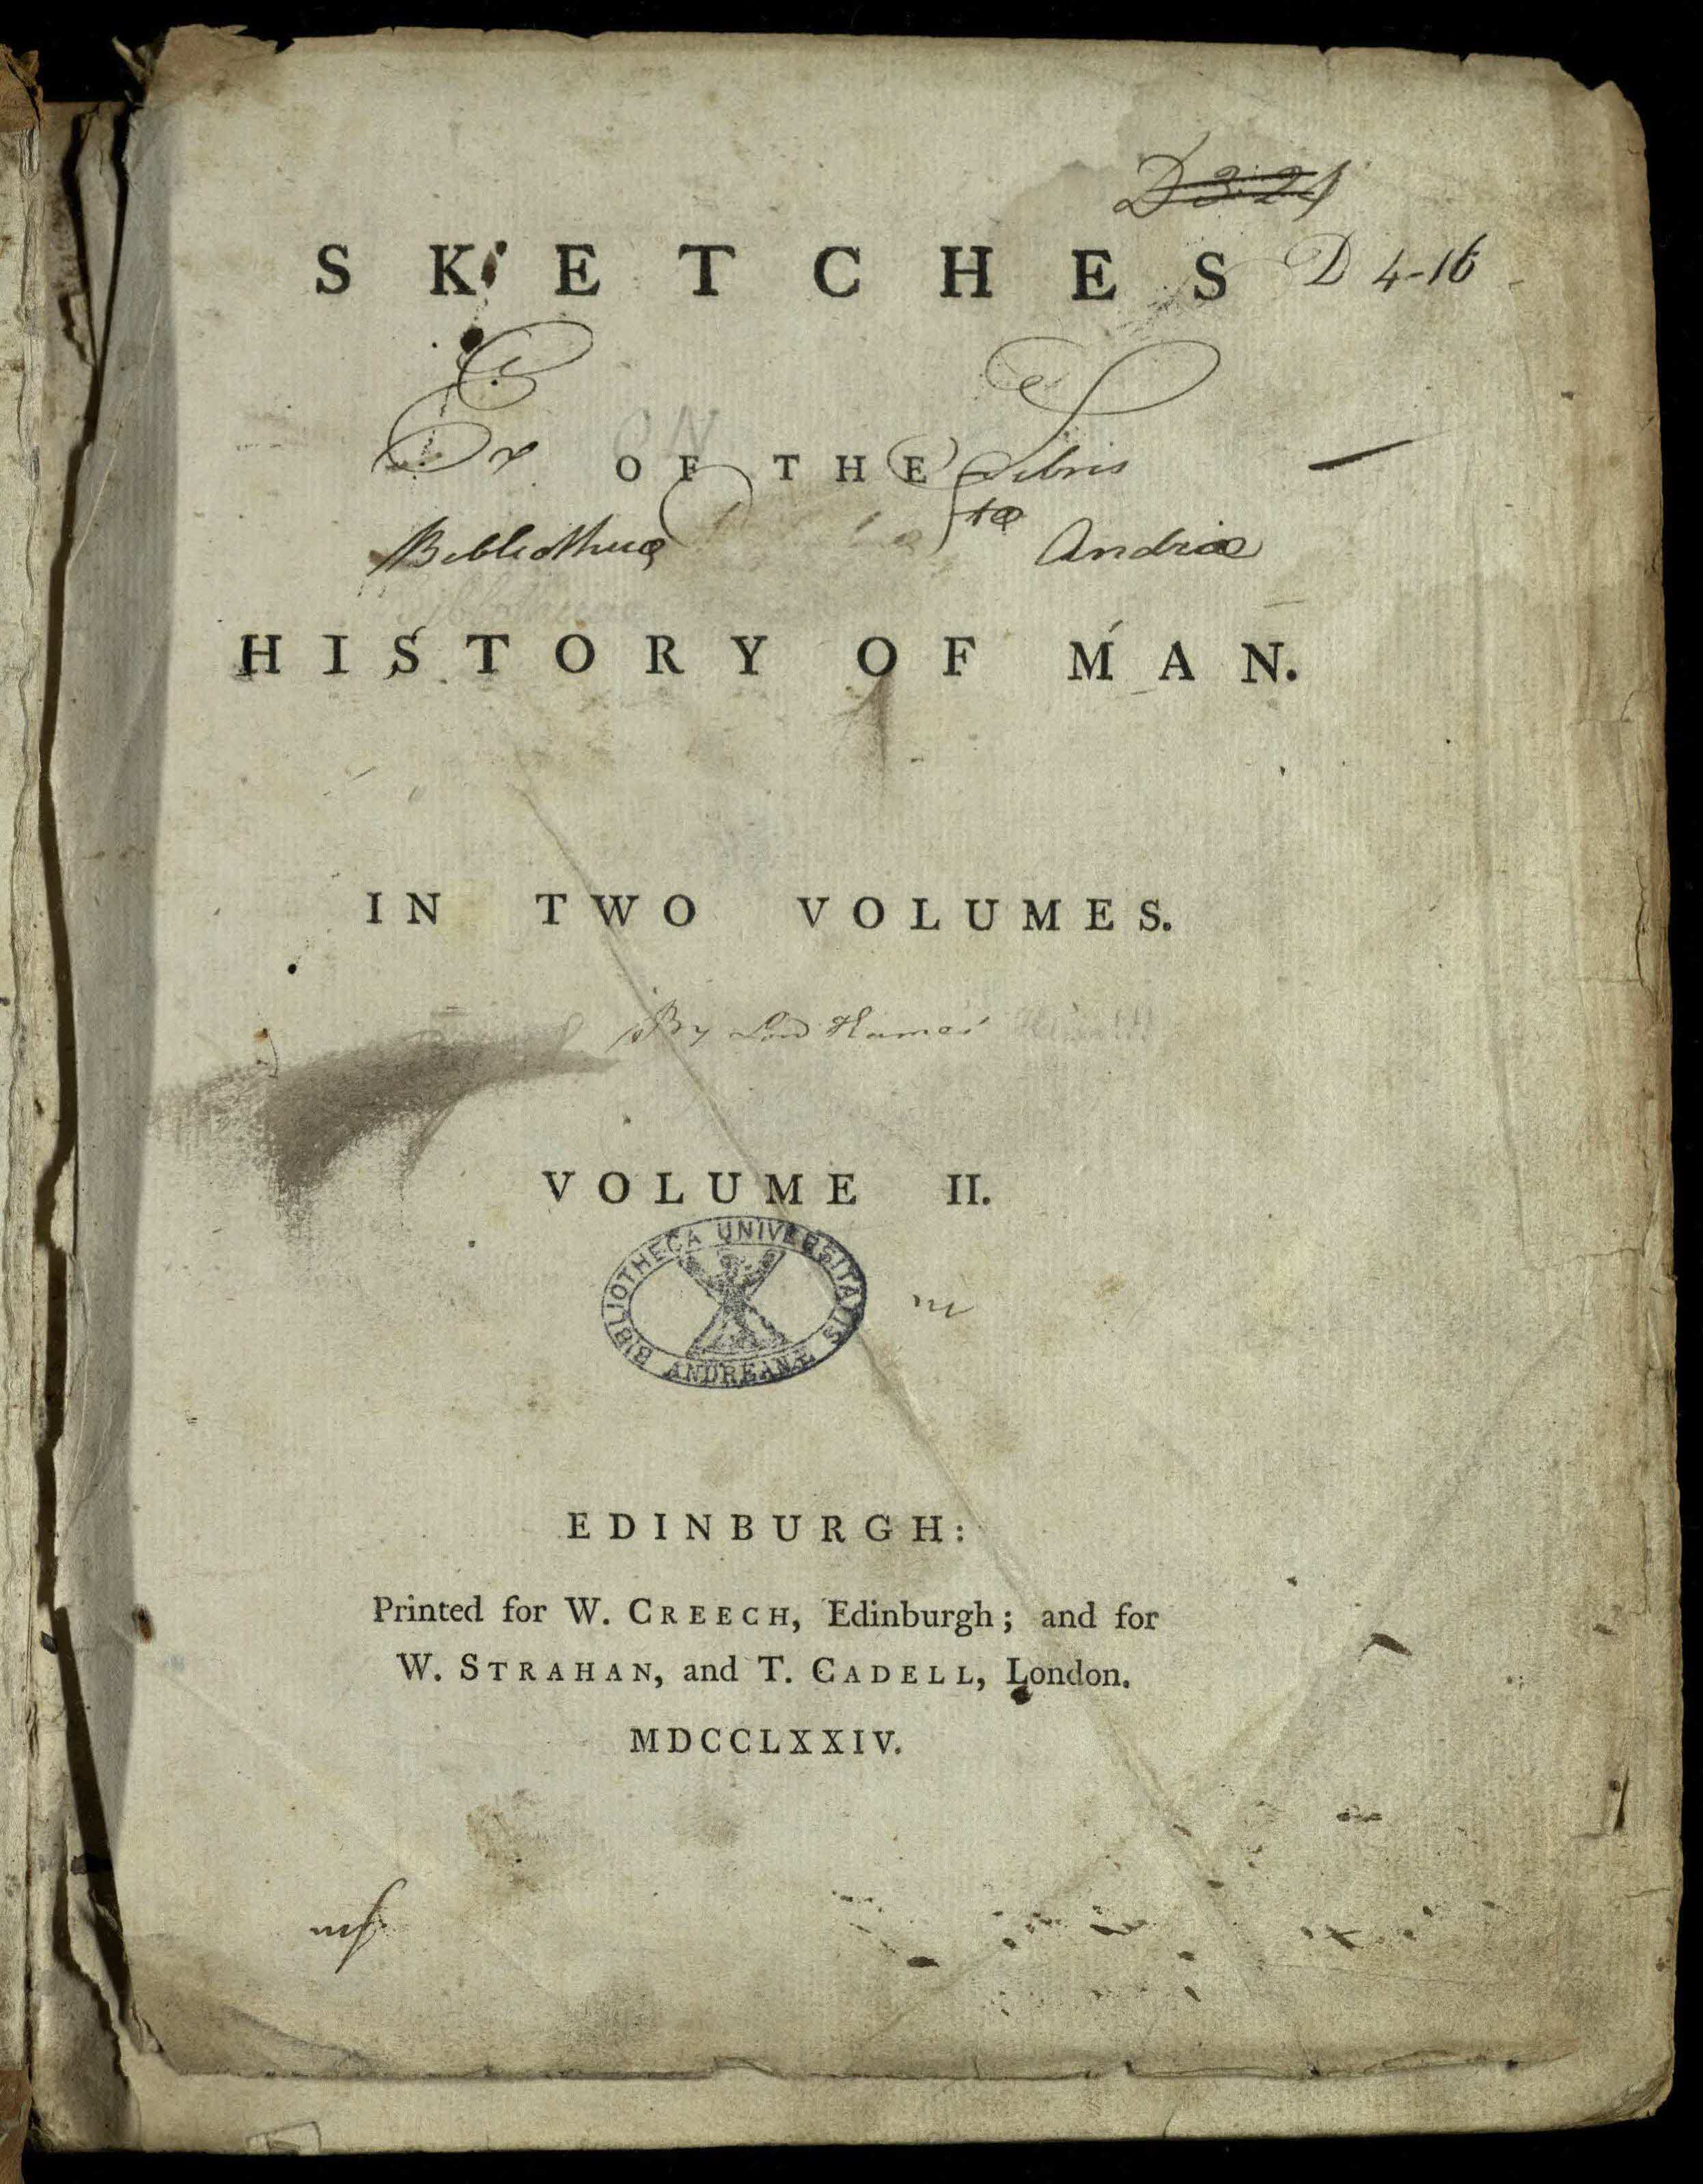 Title page of vol. 2 of Lord Kames’ Sketches of the history of man, one of the works co-published by Creech, Strahan, and Cadell, here with Creech’s name given prominence in the imprint. St Andrews copy Typ BE.D74CH.